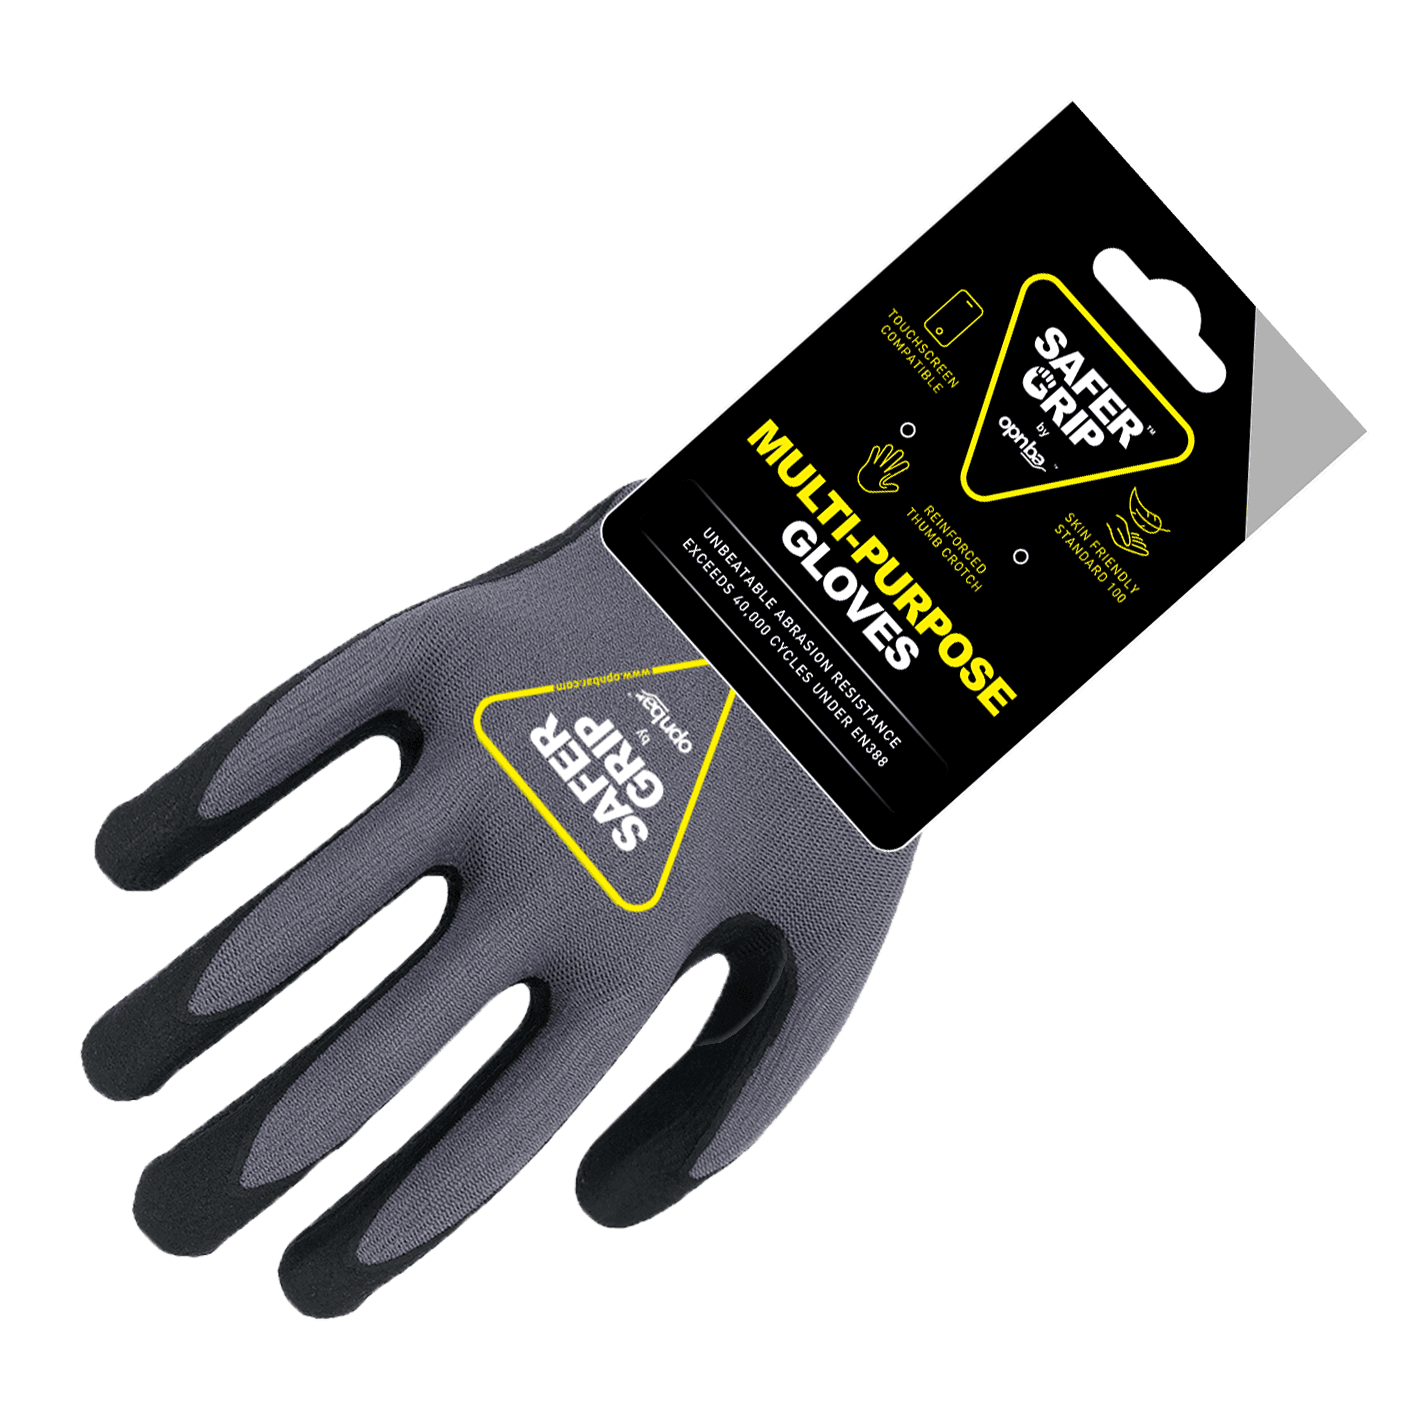 3M Super Nitrile Foam Coating Work Glove Compatible with all touch screen